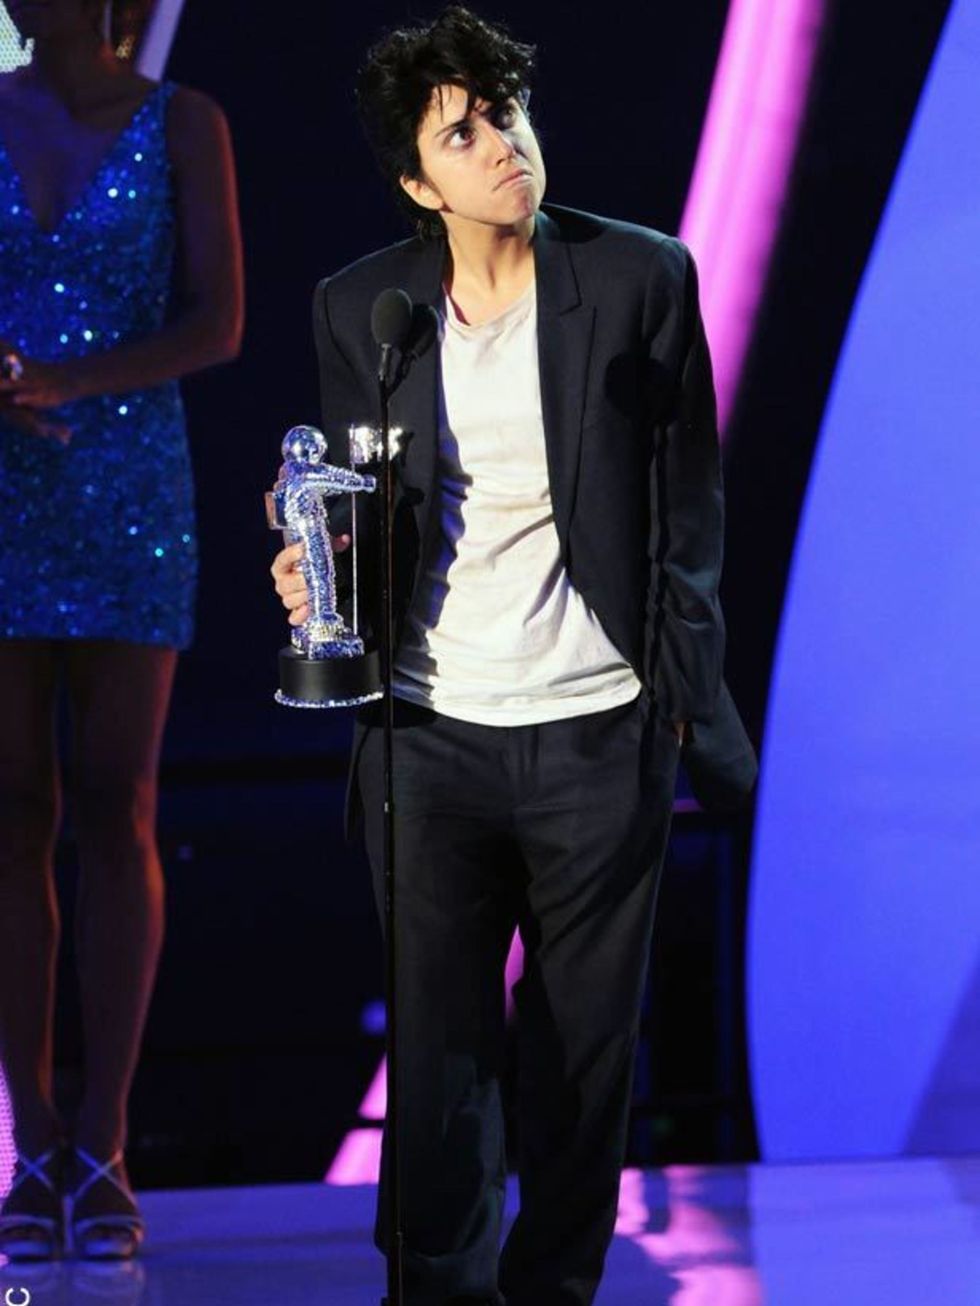 <p><a href="http://www.elleuk.com/starstyle/style-files/(section)/lady-gaga">Lady Gaga</a> in drag as her alter-ego Jo Calderone at the MTV Video Music Awards, 28 August 2011</p>